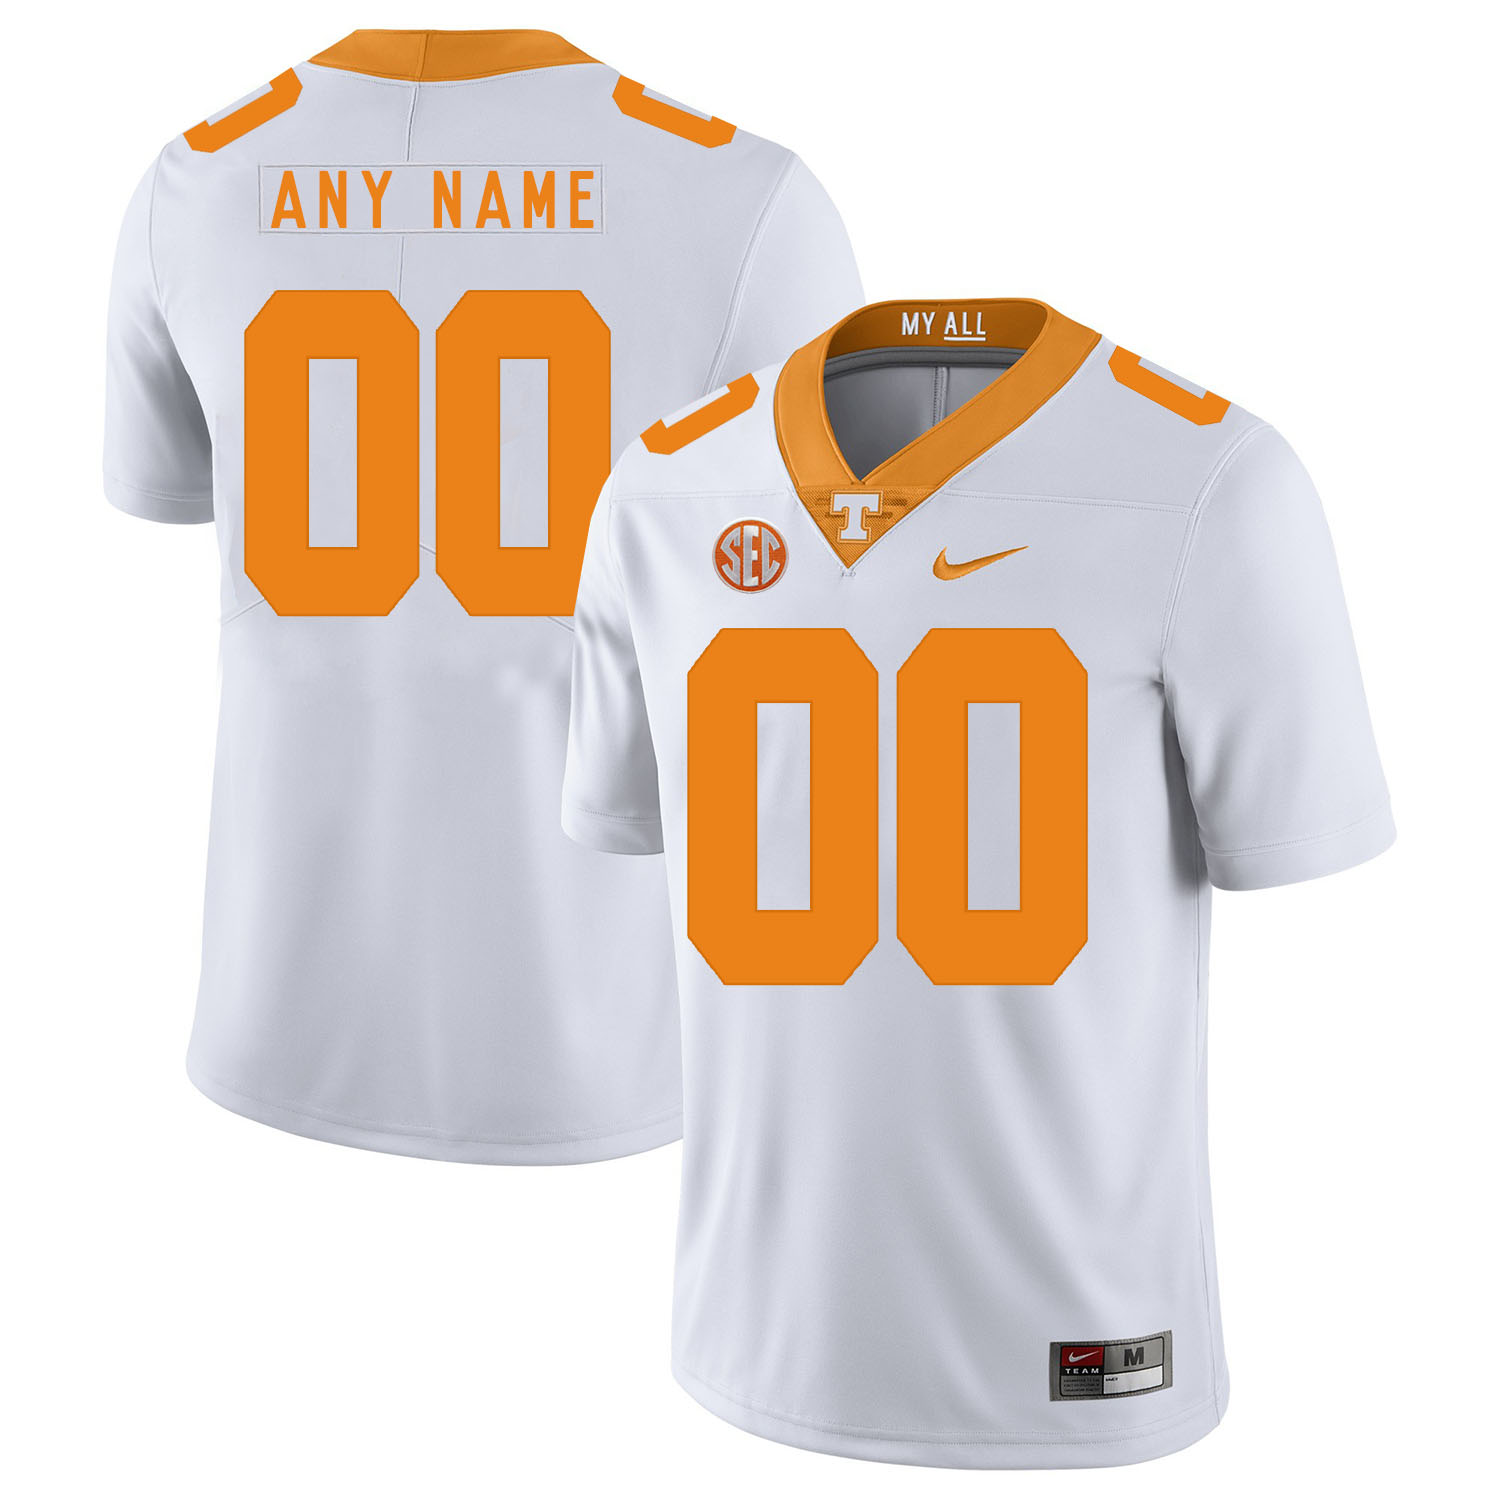 Tennessee Volunteers White Men's Customized Nike College Football Jersey